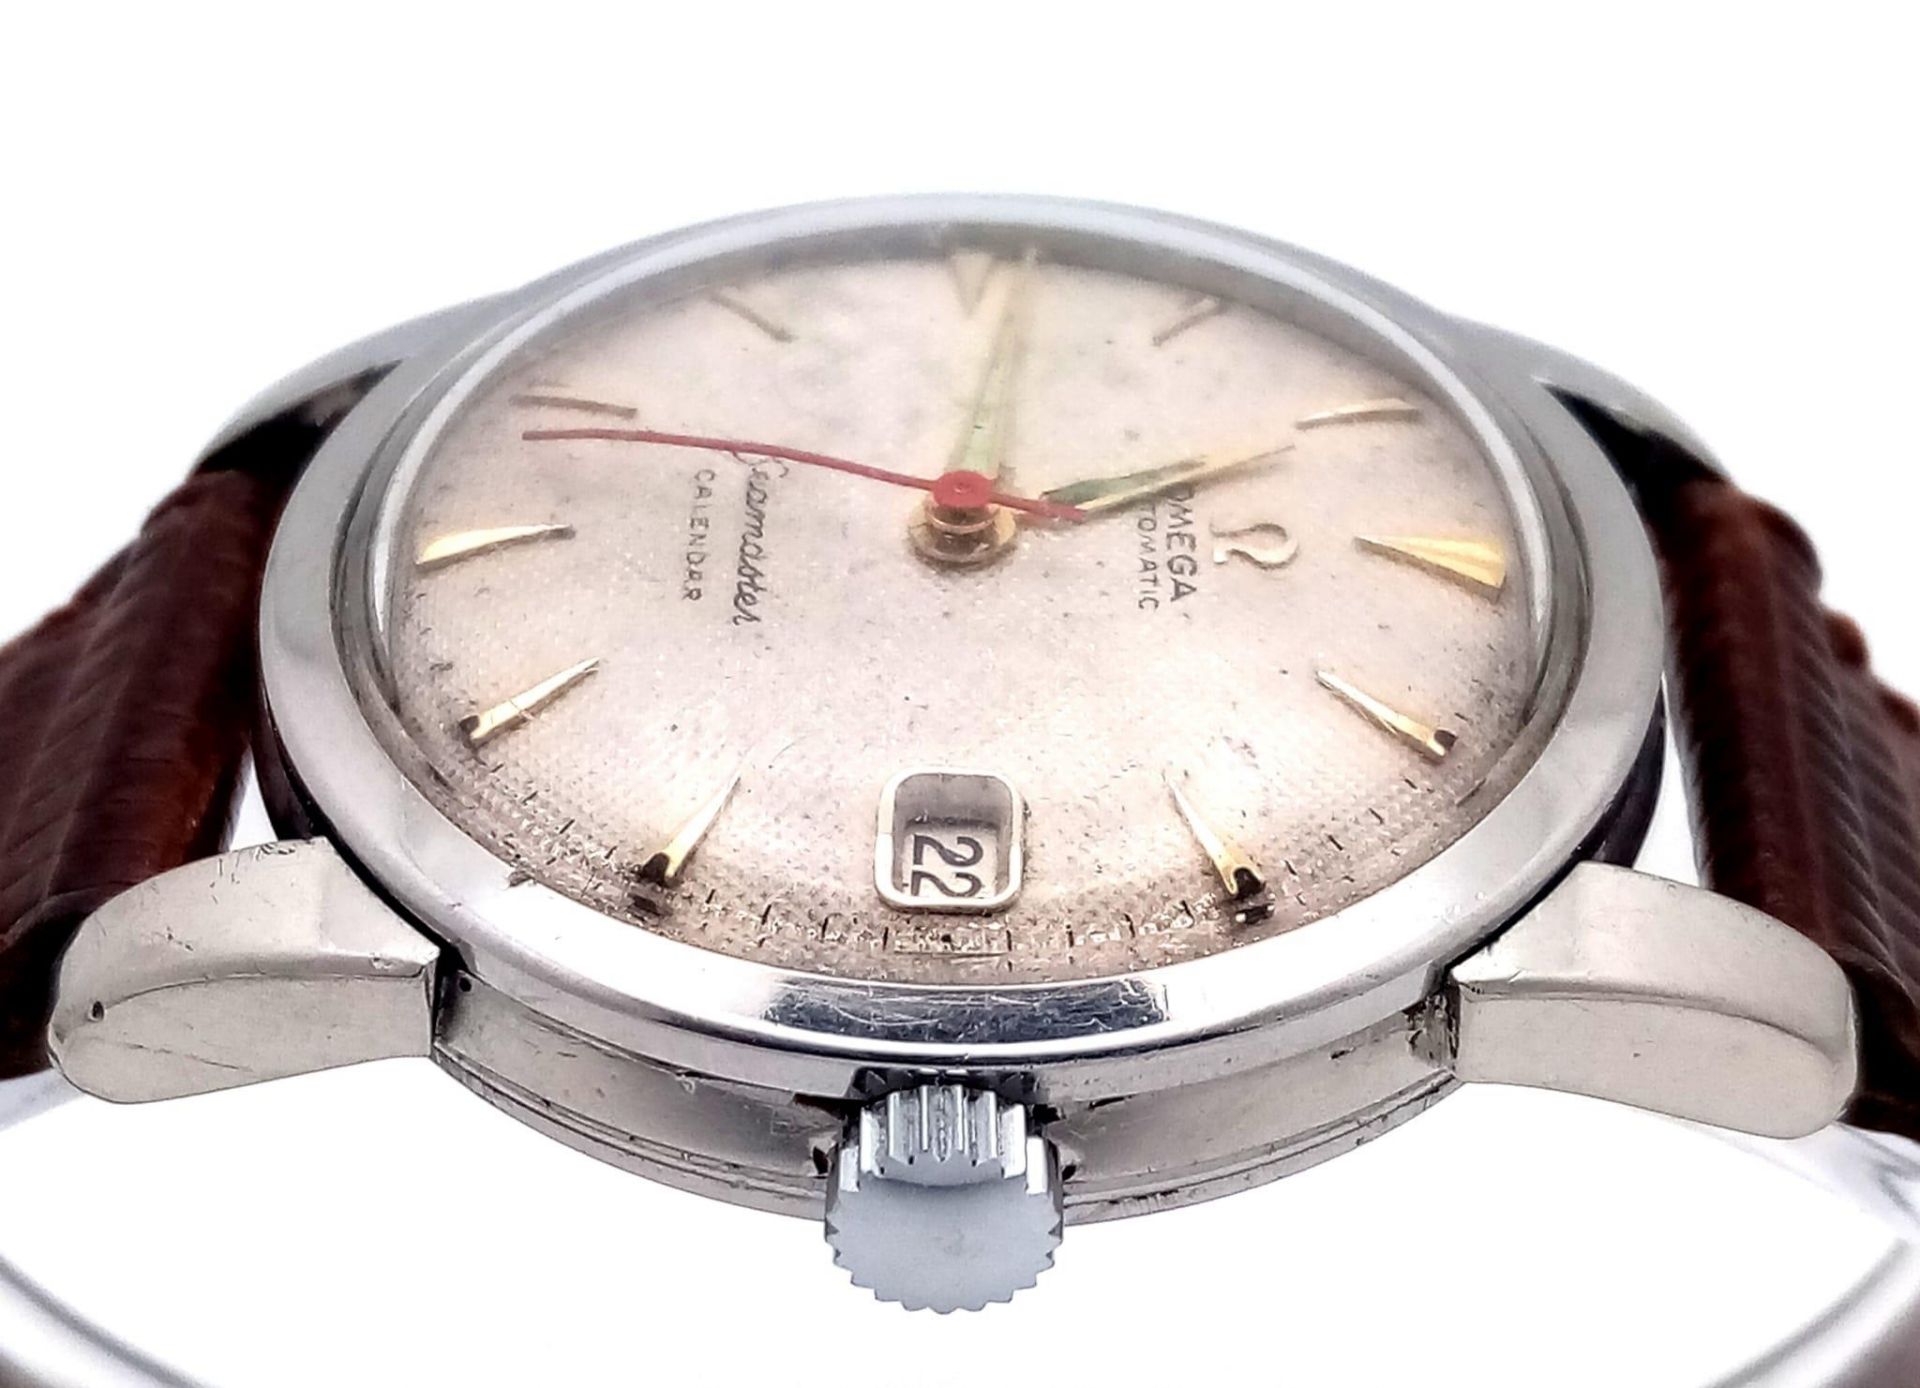 A Vintage Omega Seamaster Calendar Gents Watch. Brown leather strap. Stainless steel case - 33mm. - Image 6 of 8